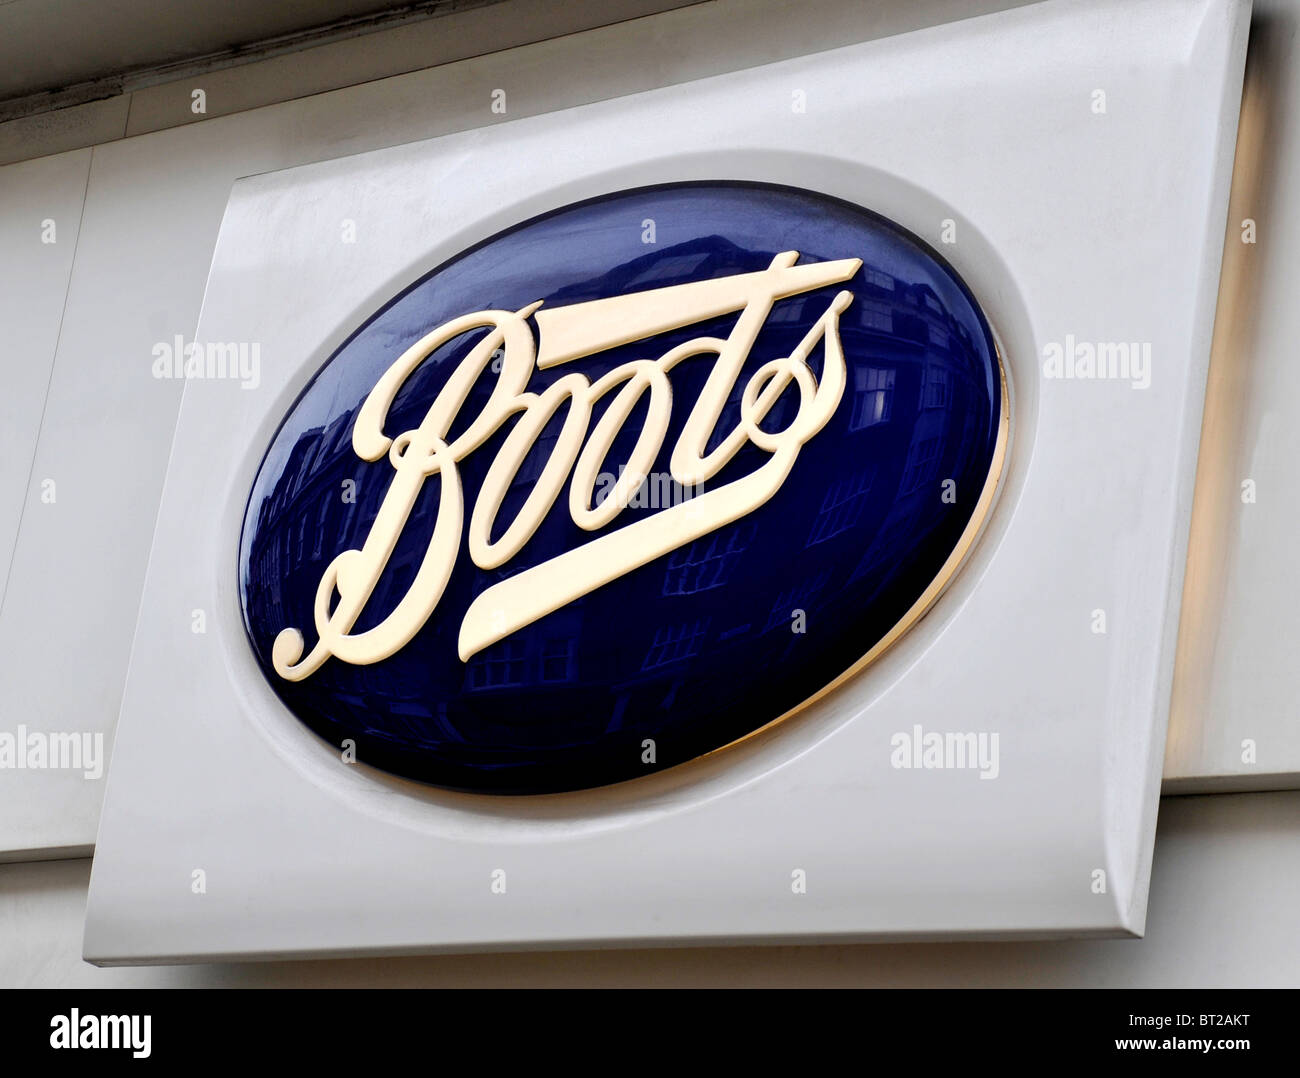 Boots Signage High Resolution Stock Photography and Images - Alamy